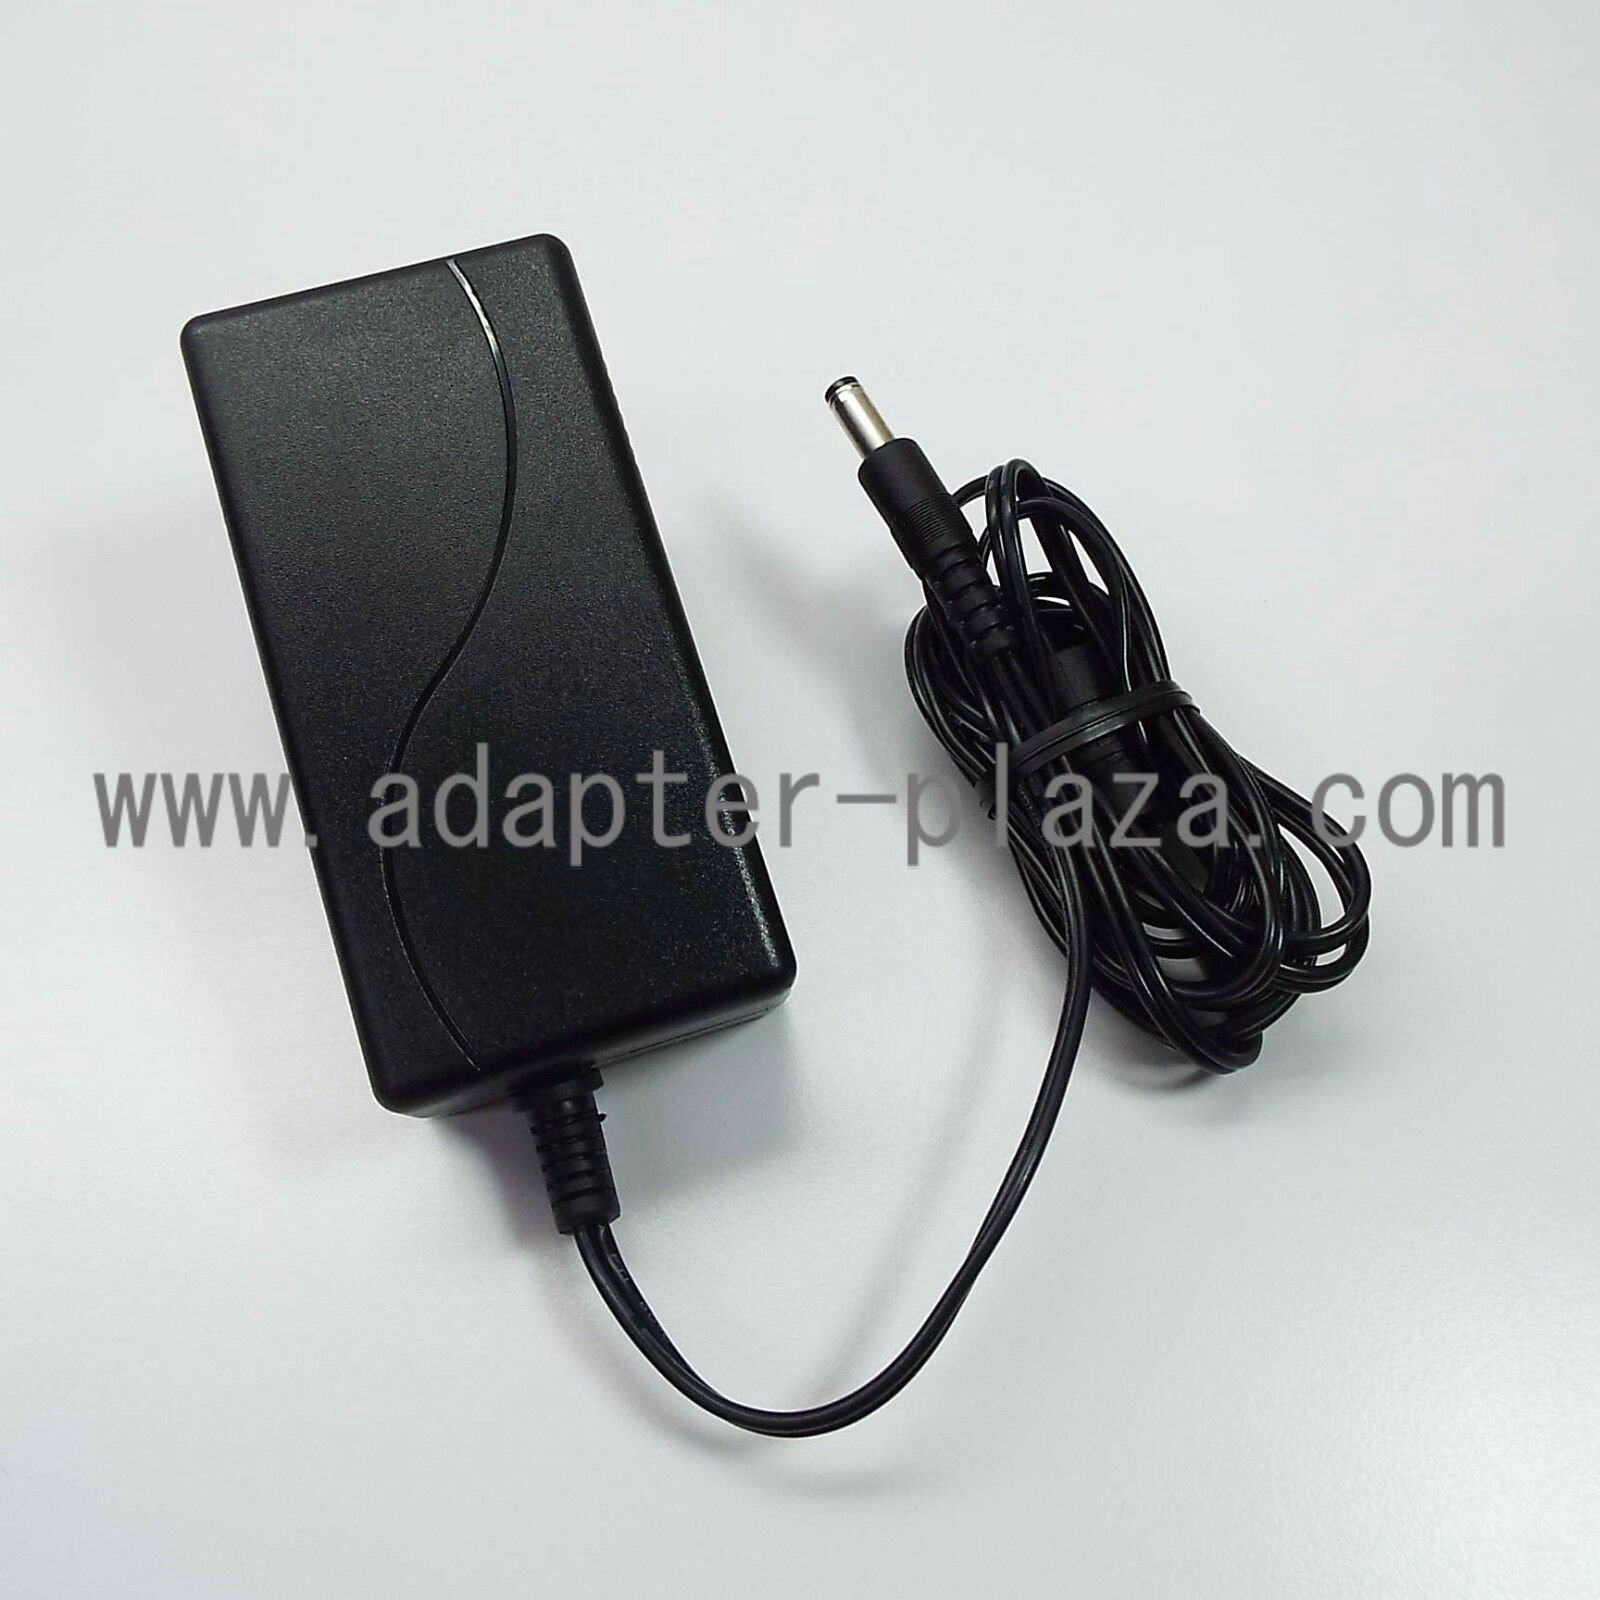 *Brand NEW* JIEDONG ELECTRON FACTORY JDA1200300WUS 12V 3A AC DC Adapter POWER SUPPLY